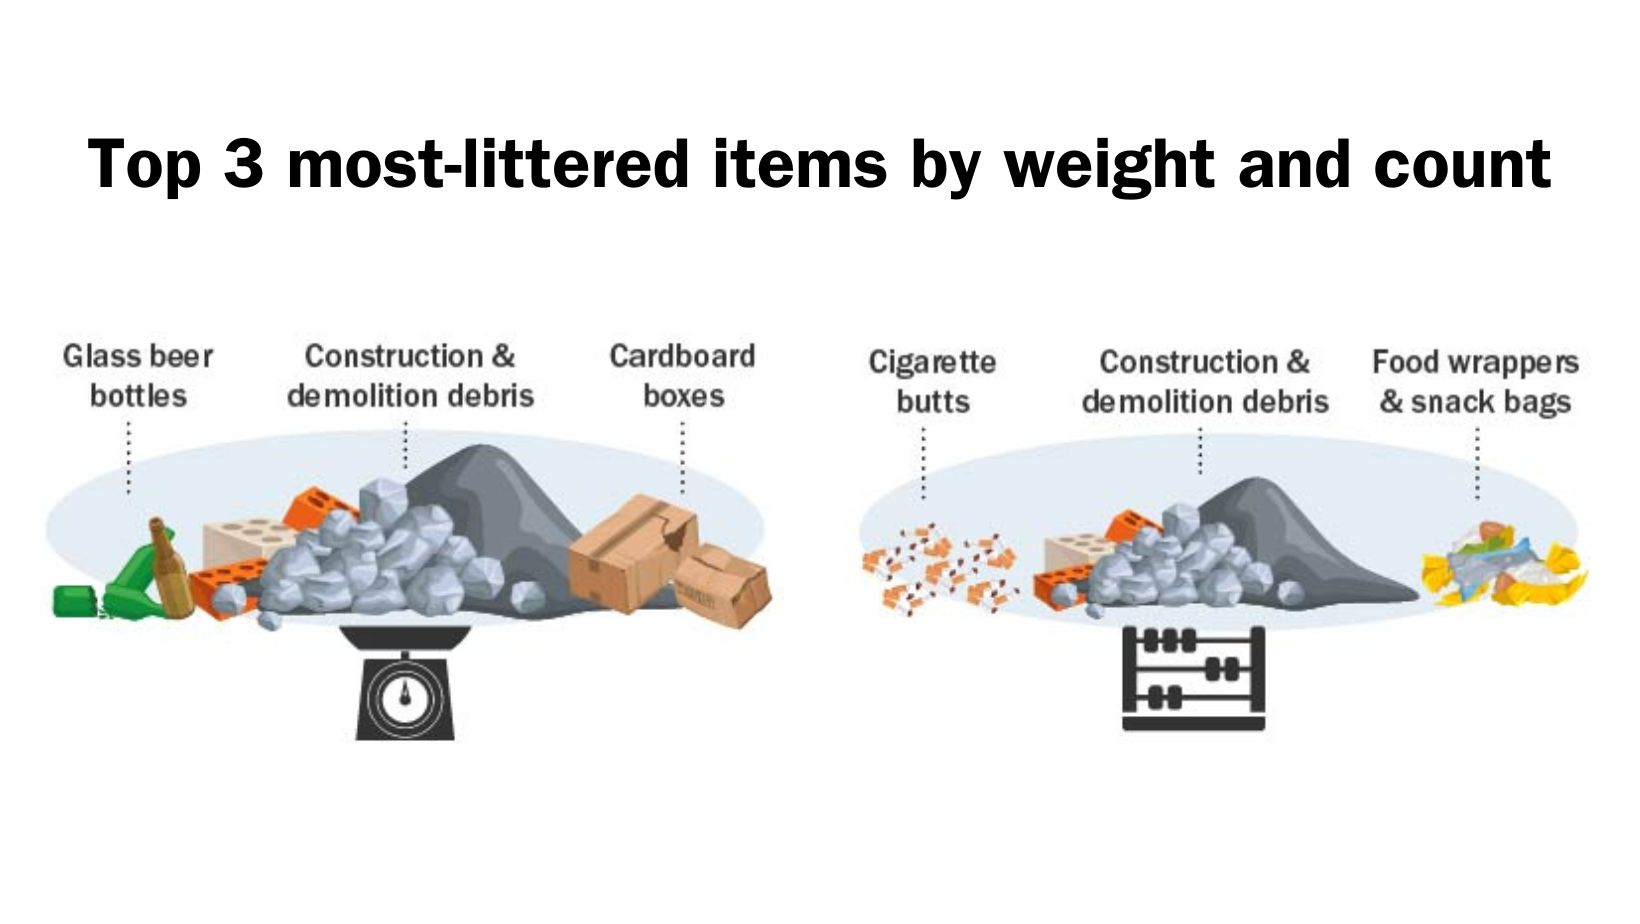 Infographic showing the top 3 most-littered items by weight and count. Cigarette butts are the most littered item by piece. 